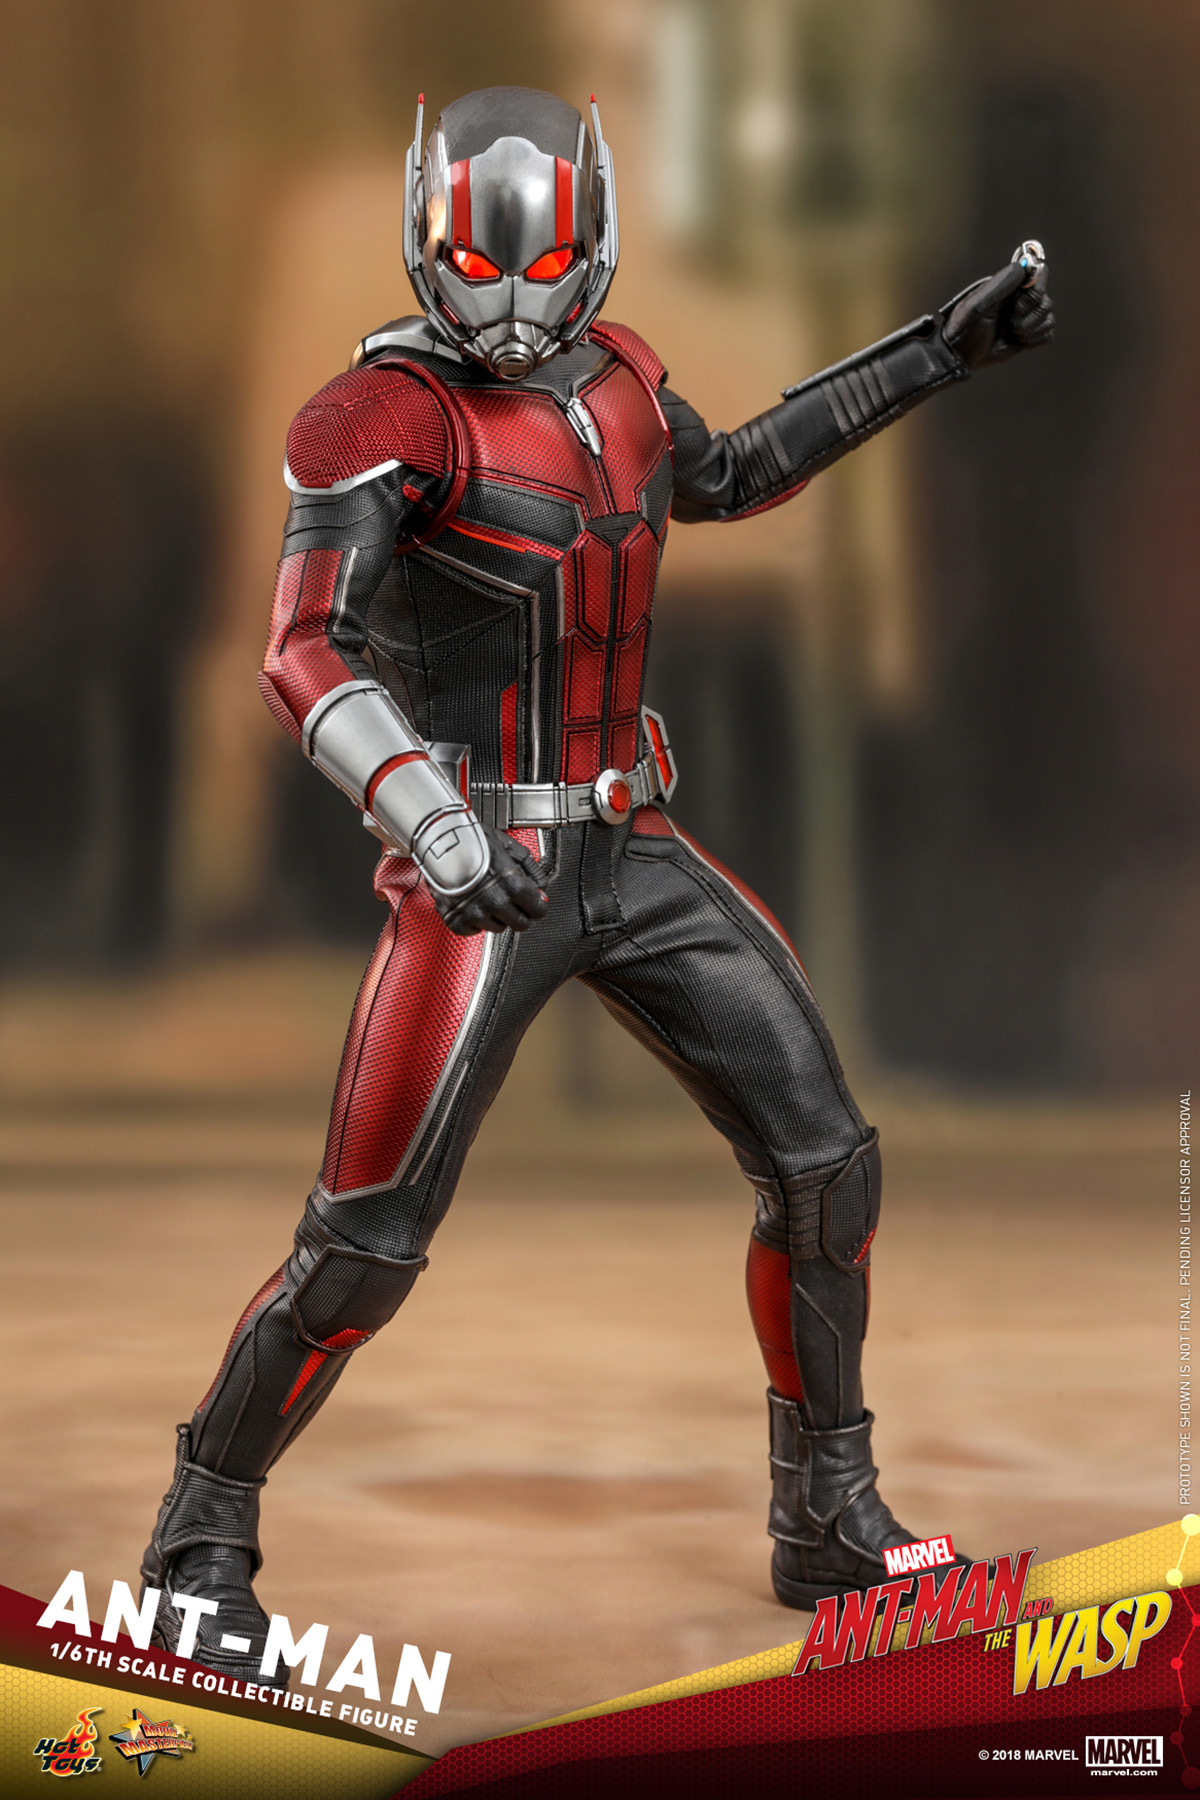 hot-toys-ant-man-and-the-wasp-ant-man-collectible-figure_pr14